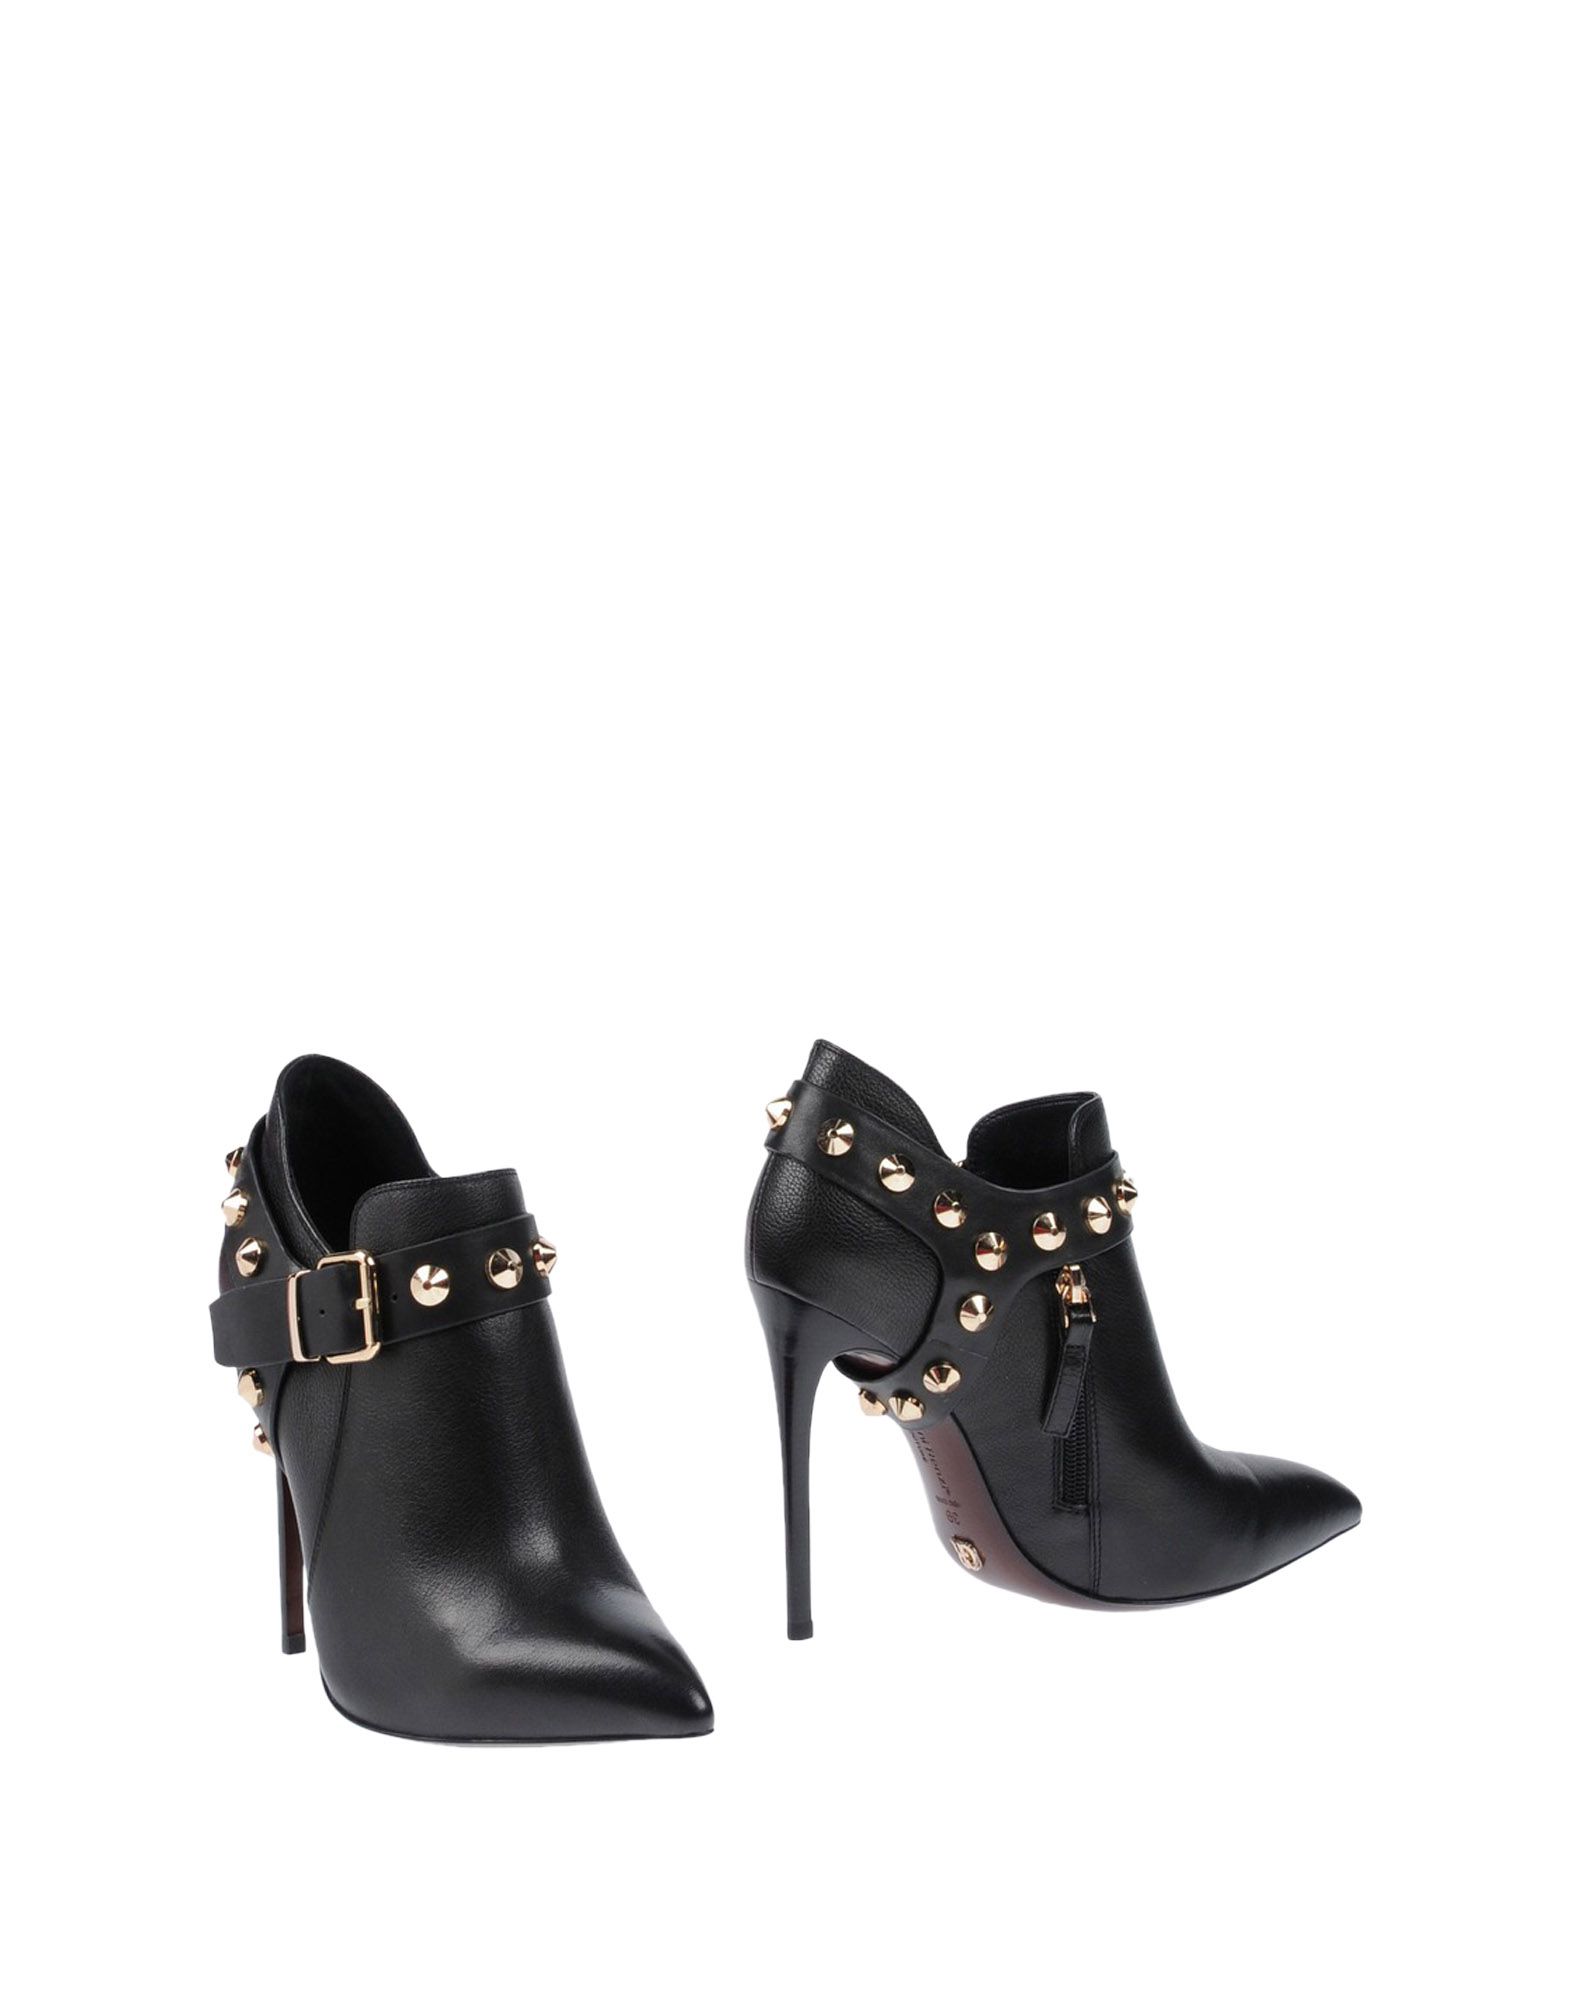 GIANNI RENZI® COUTURE Ankle boots